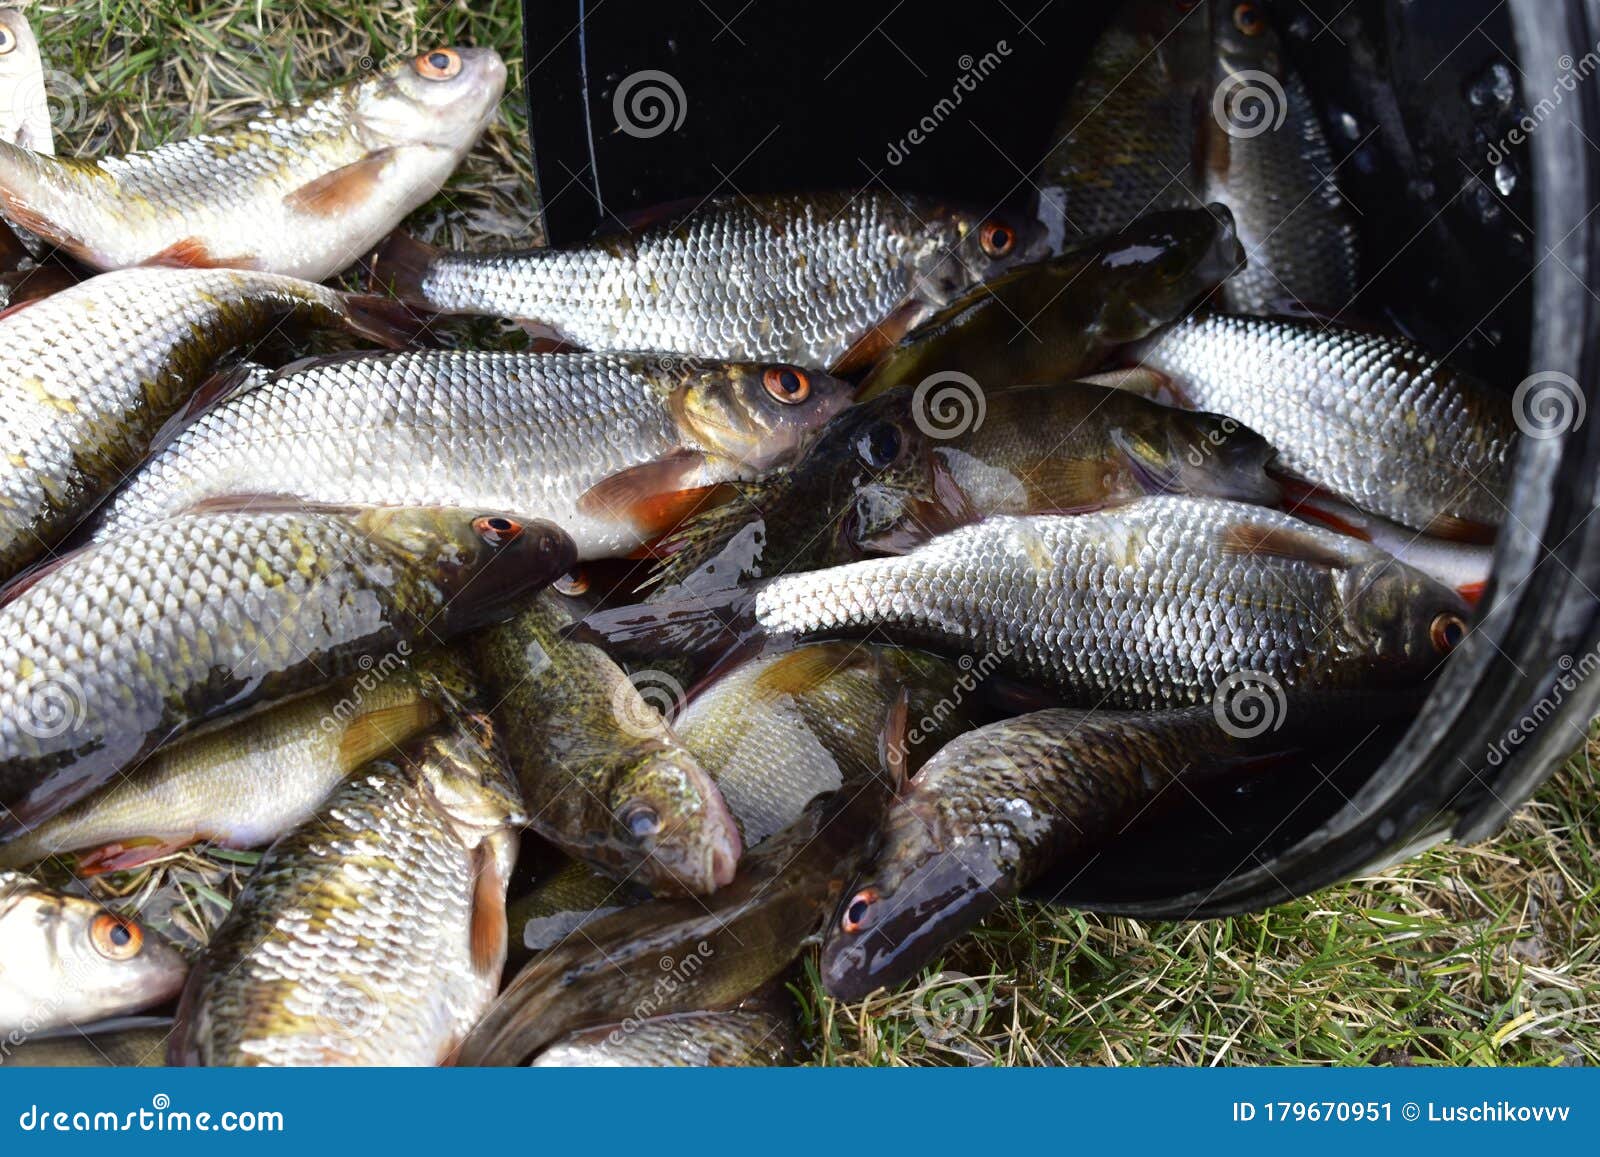 Different Freshly Caught River Fish in the Summer Stock Image